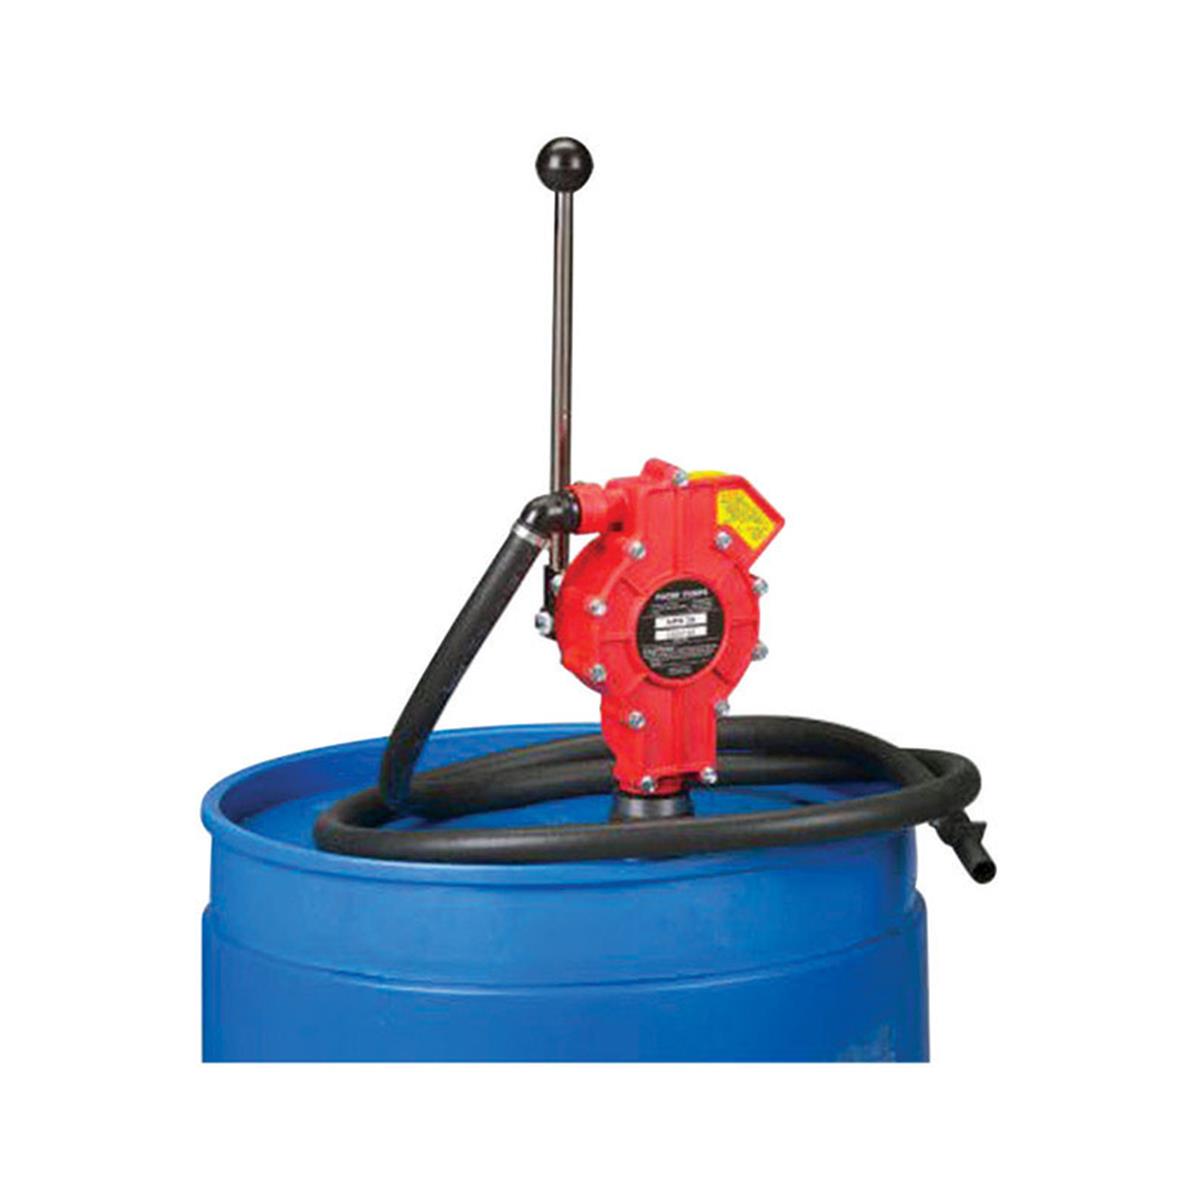 Picture of Asm Industries 4588067 8 ft. Hand Operated Drum Pump